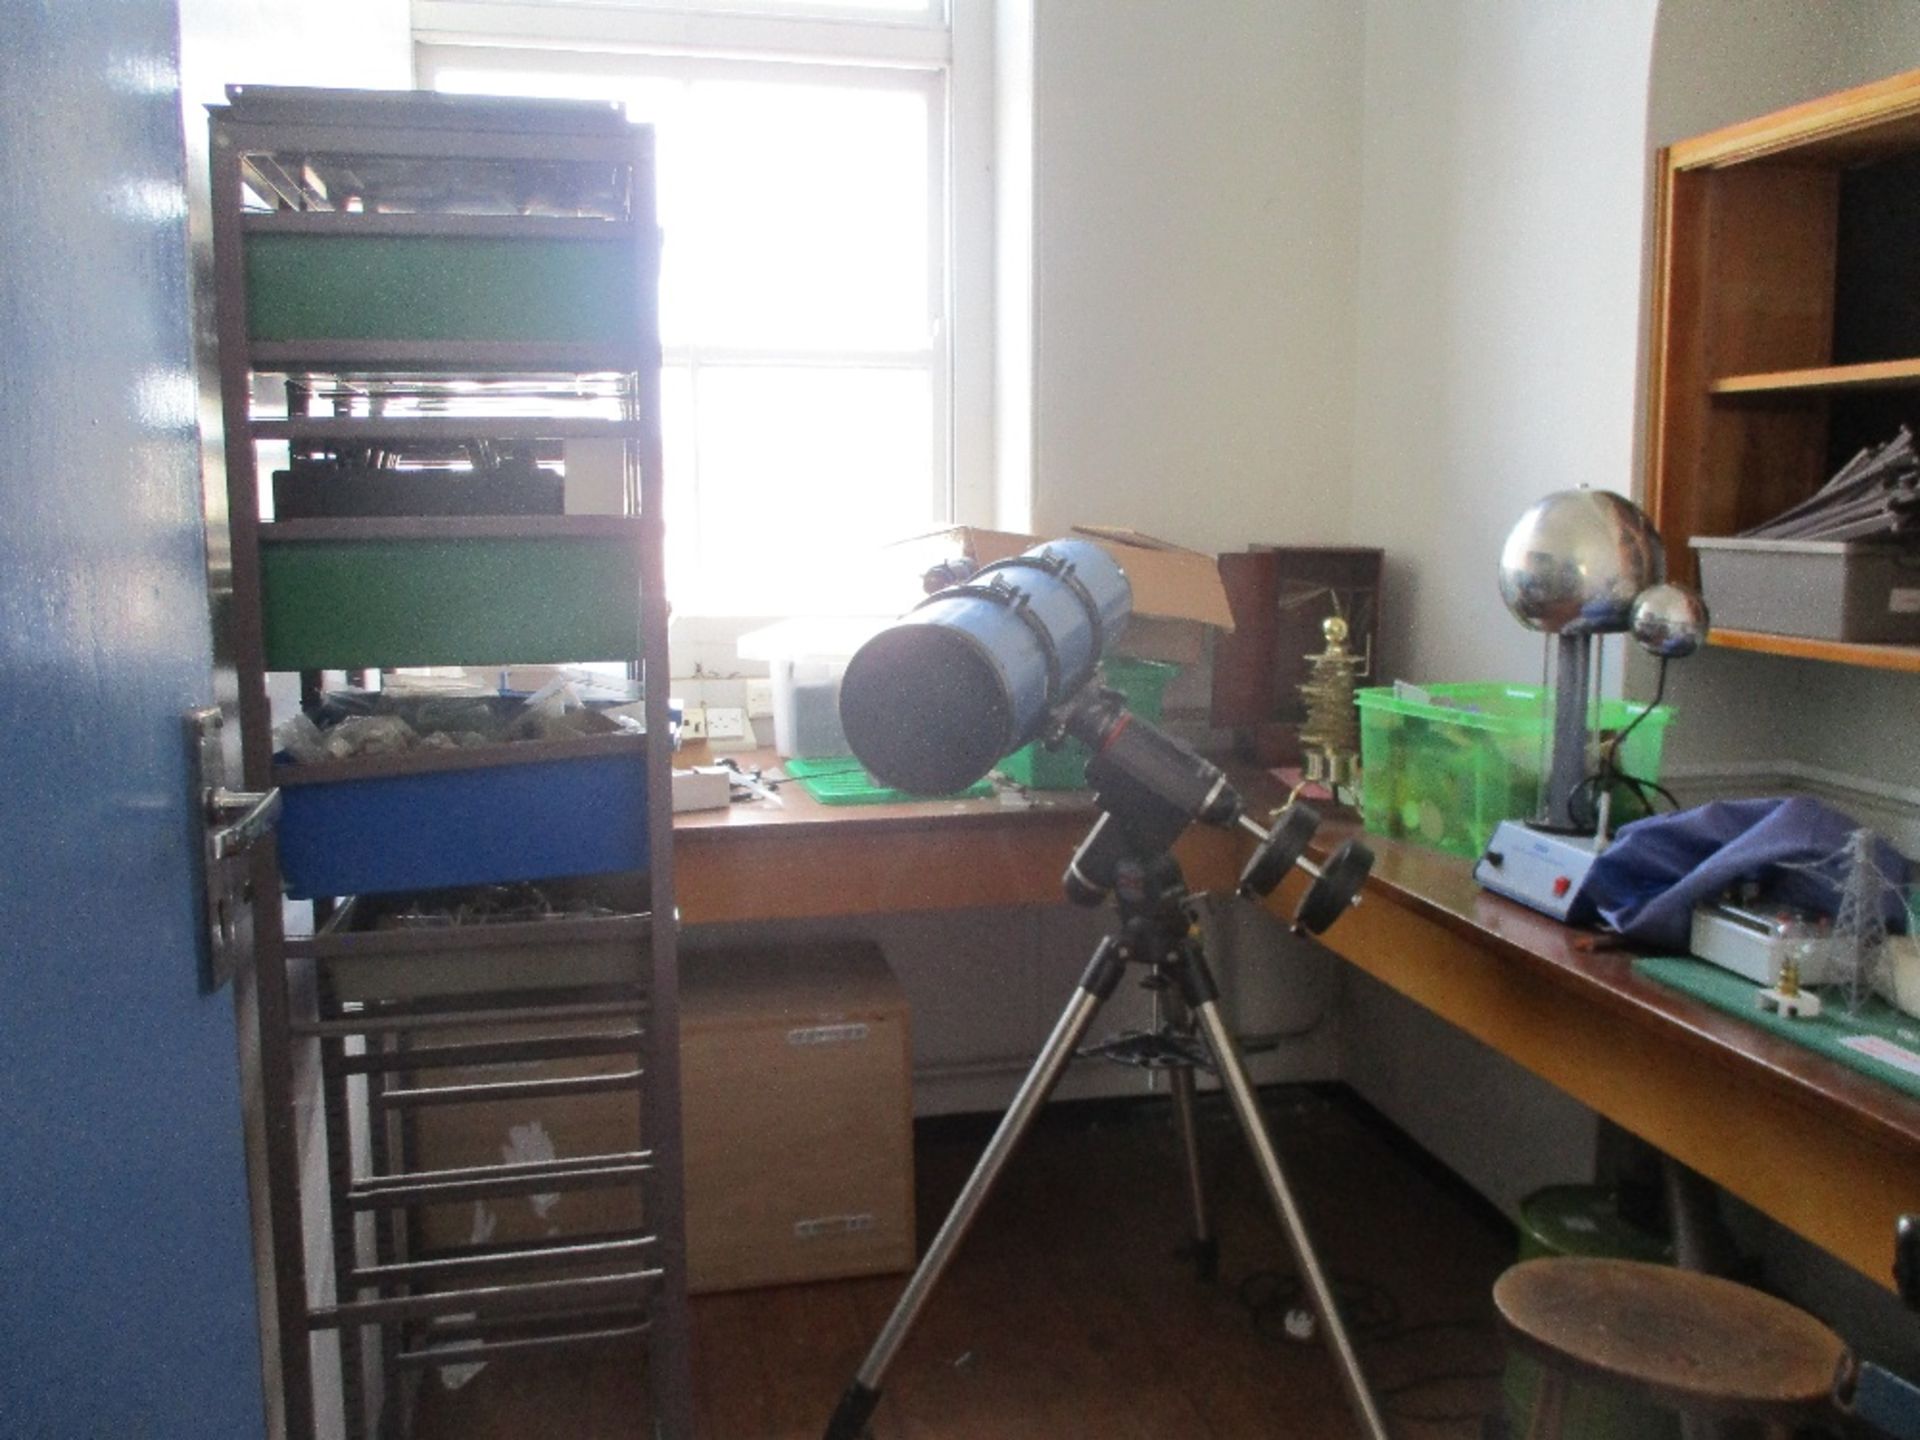 Contents of Lab Room - Image 4 of 4